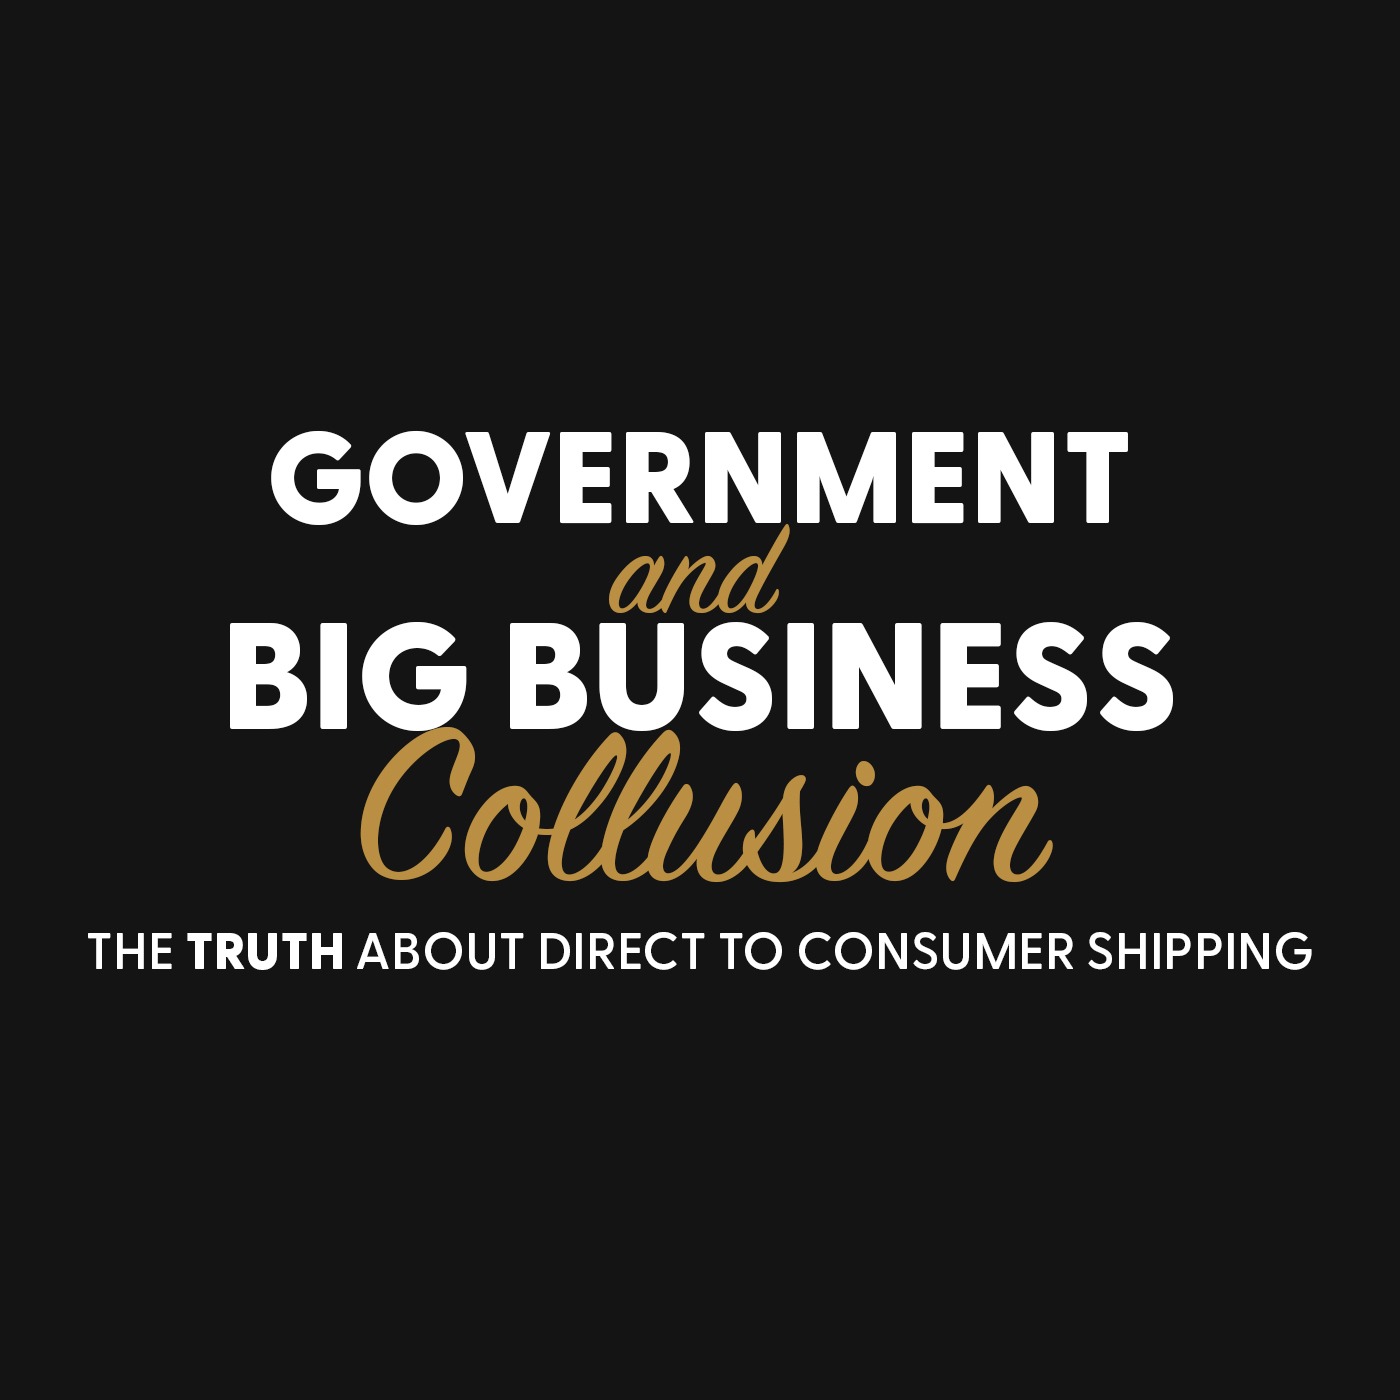 Government and Big Business Collude: The TRUTH About Direct to Consumer Shipping